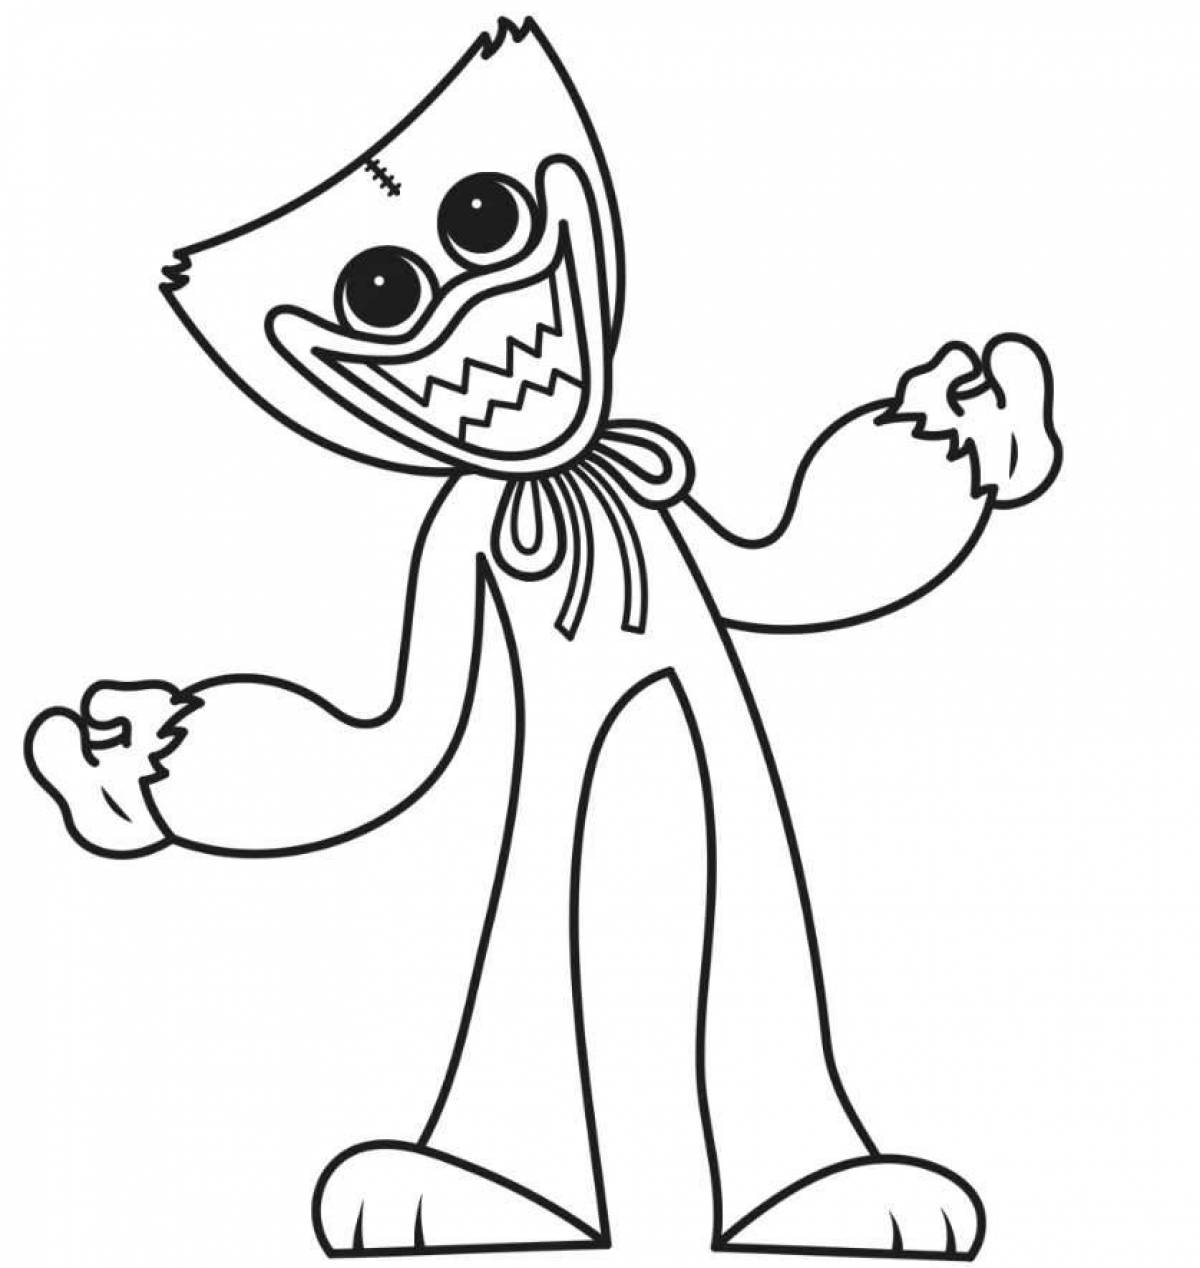 Happy haggy waggie coloring page